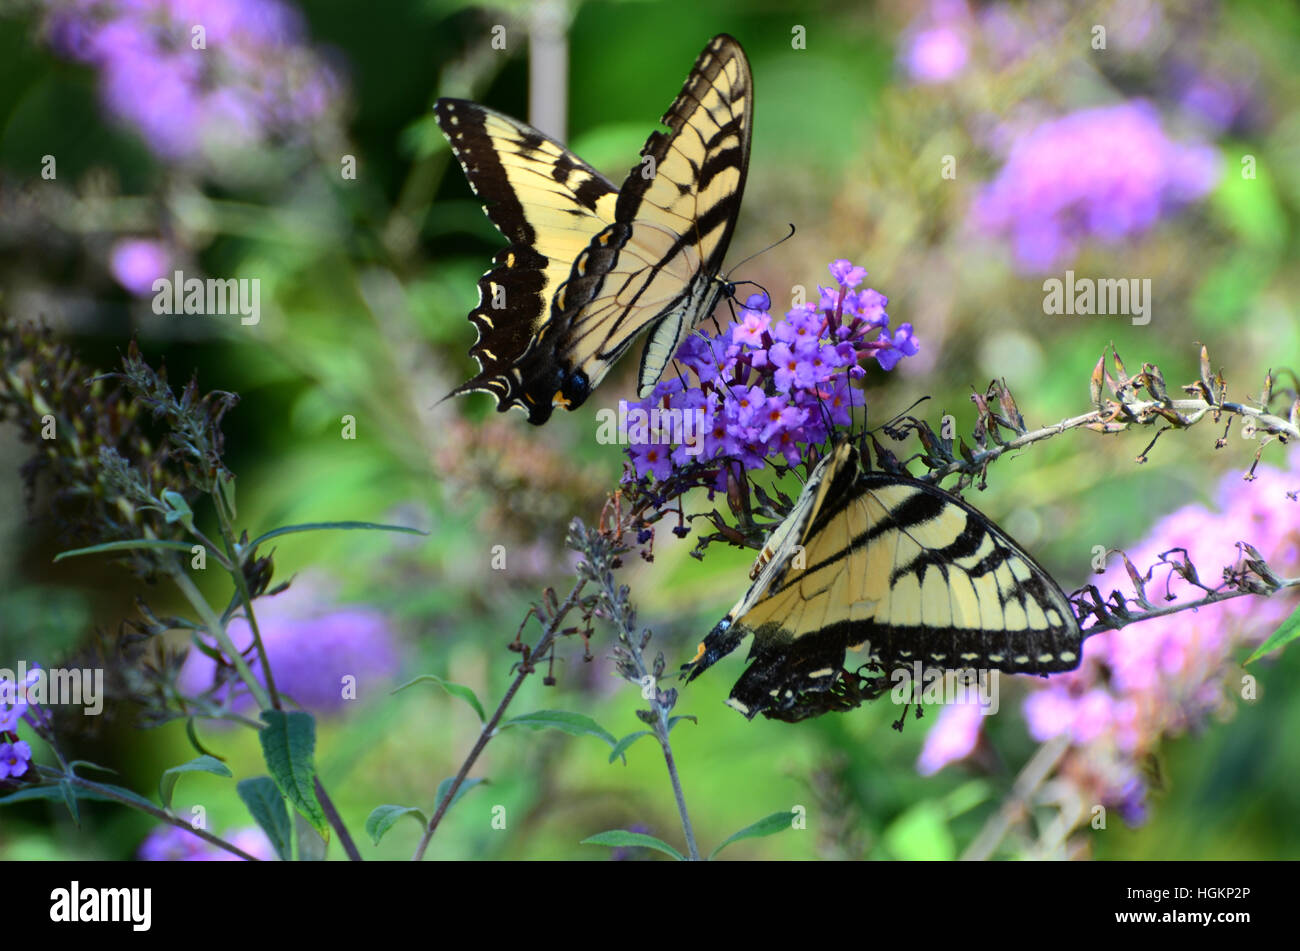 Black and yellow butterflies land on a purple flower. Stock Photo